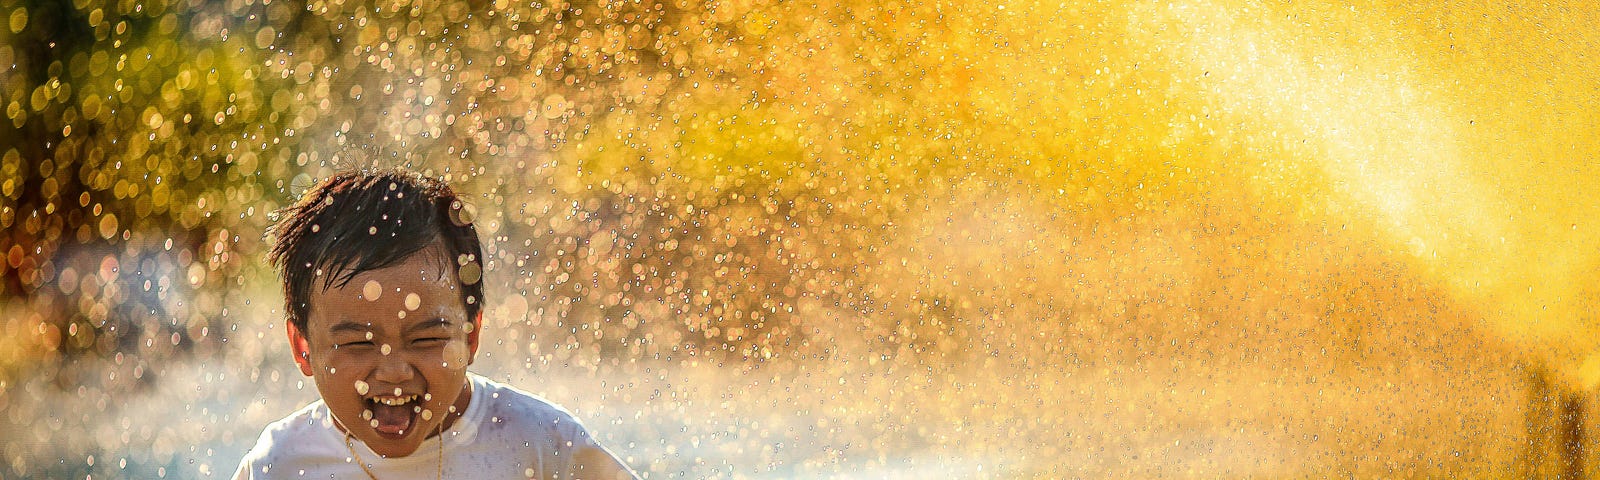 Young boy filled with joy and hope running through a sprinkler of gold lit water. Yellow is the predominant colour.